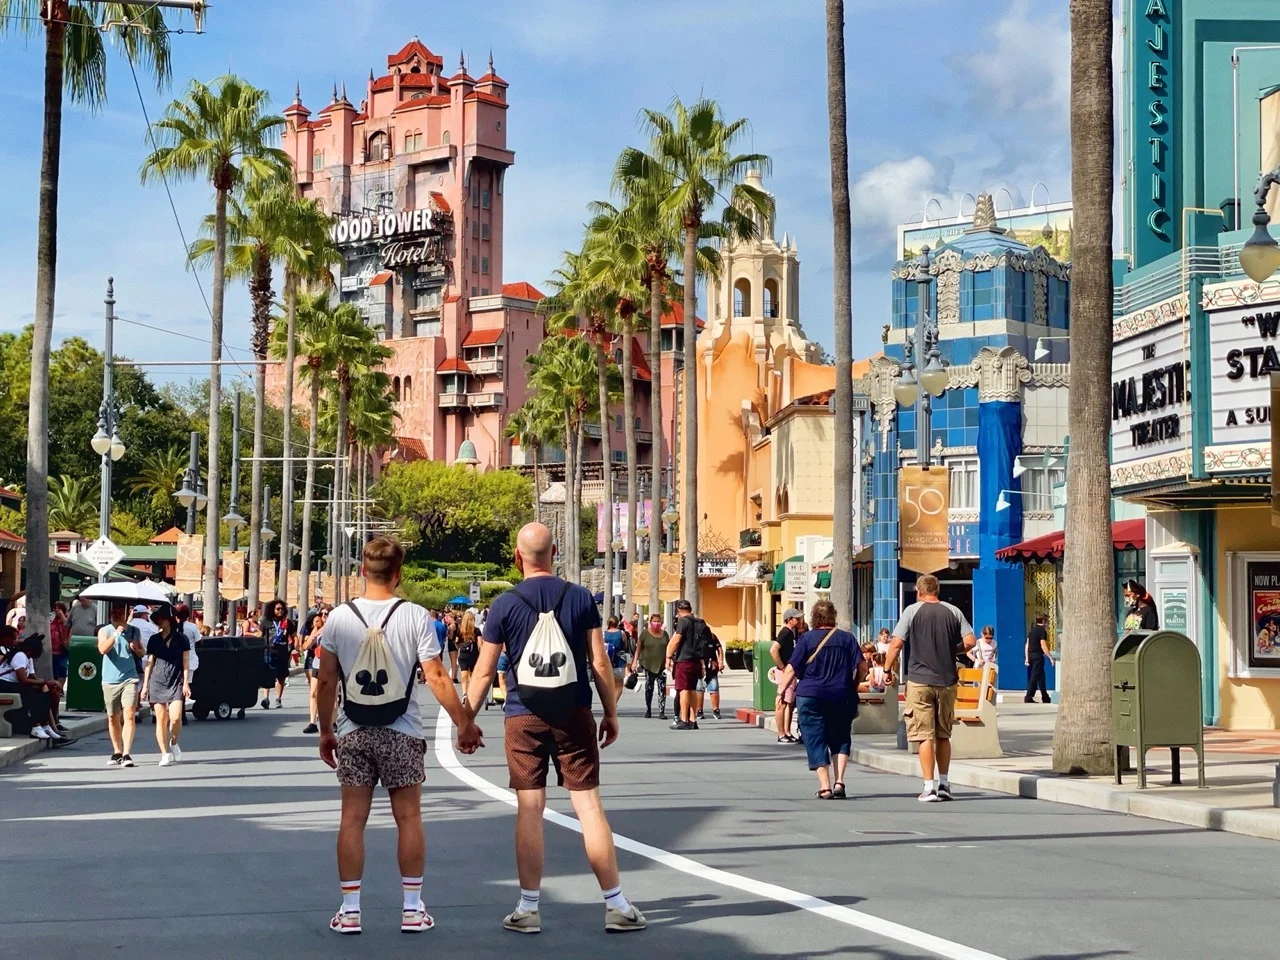 Hand in Hand in Disney's Hollywood Studios - Disney supporting LGBT Community with the new Disney Pride Collection © Coupleofmen.com